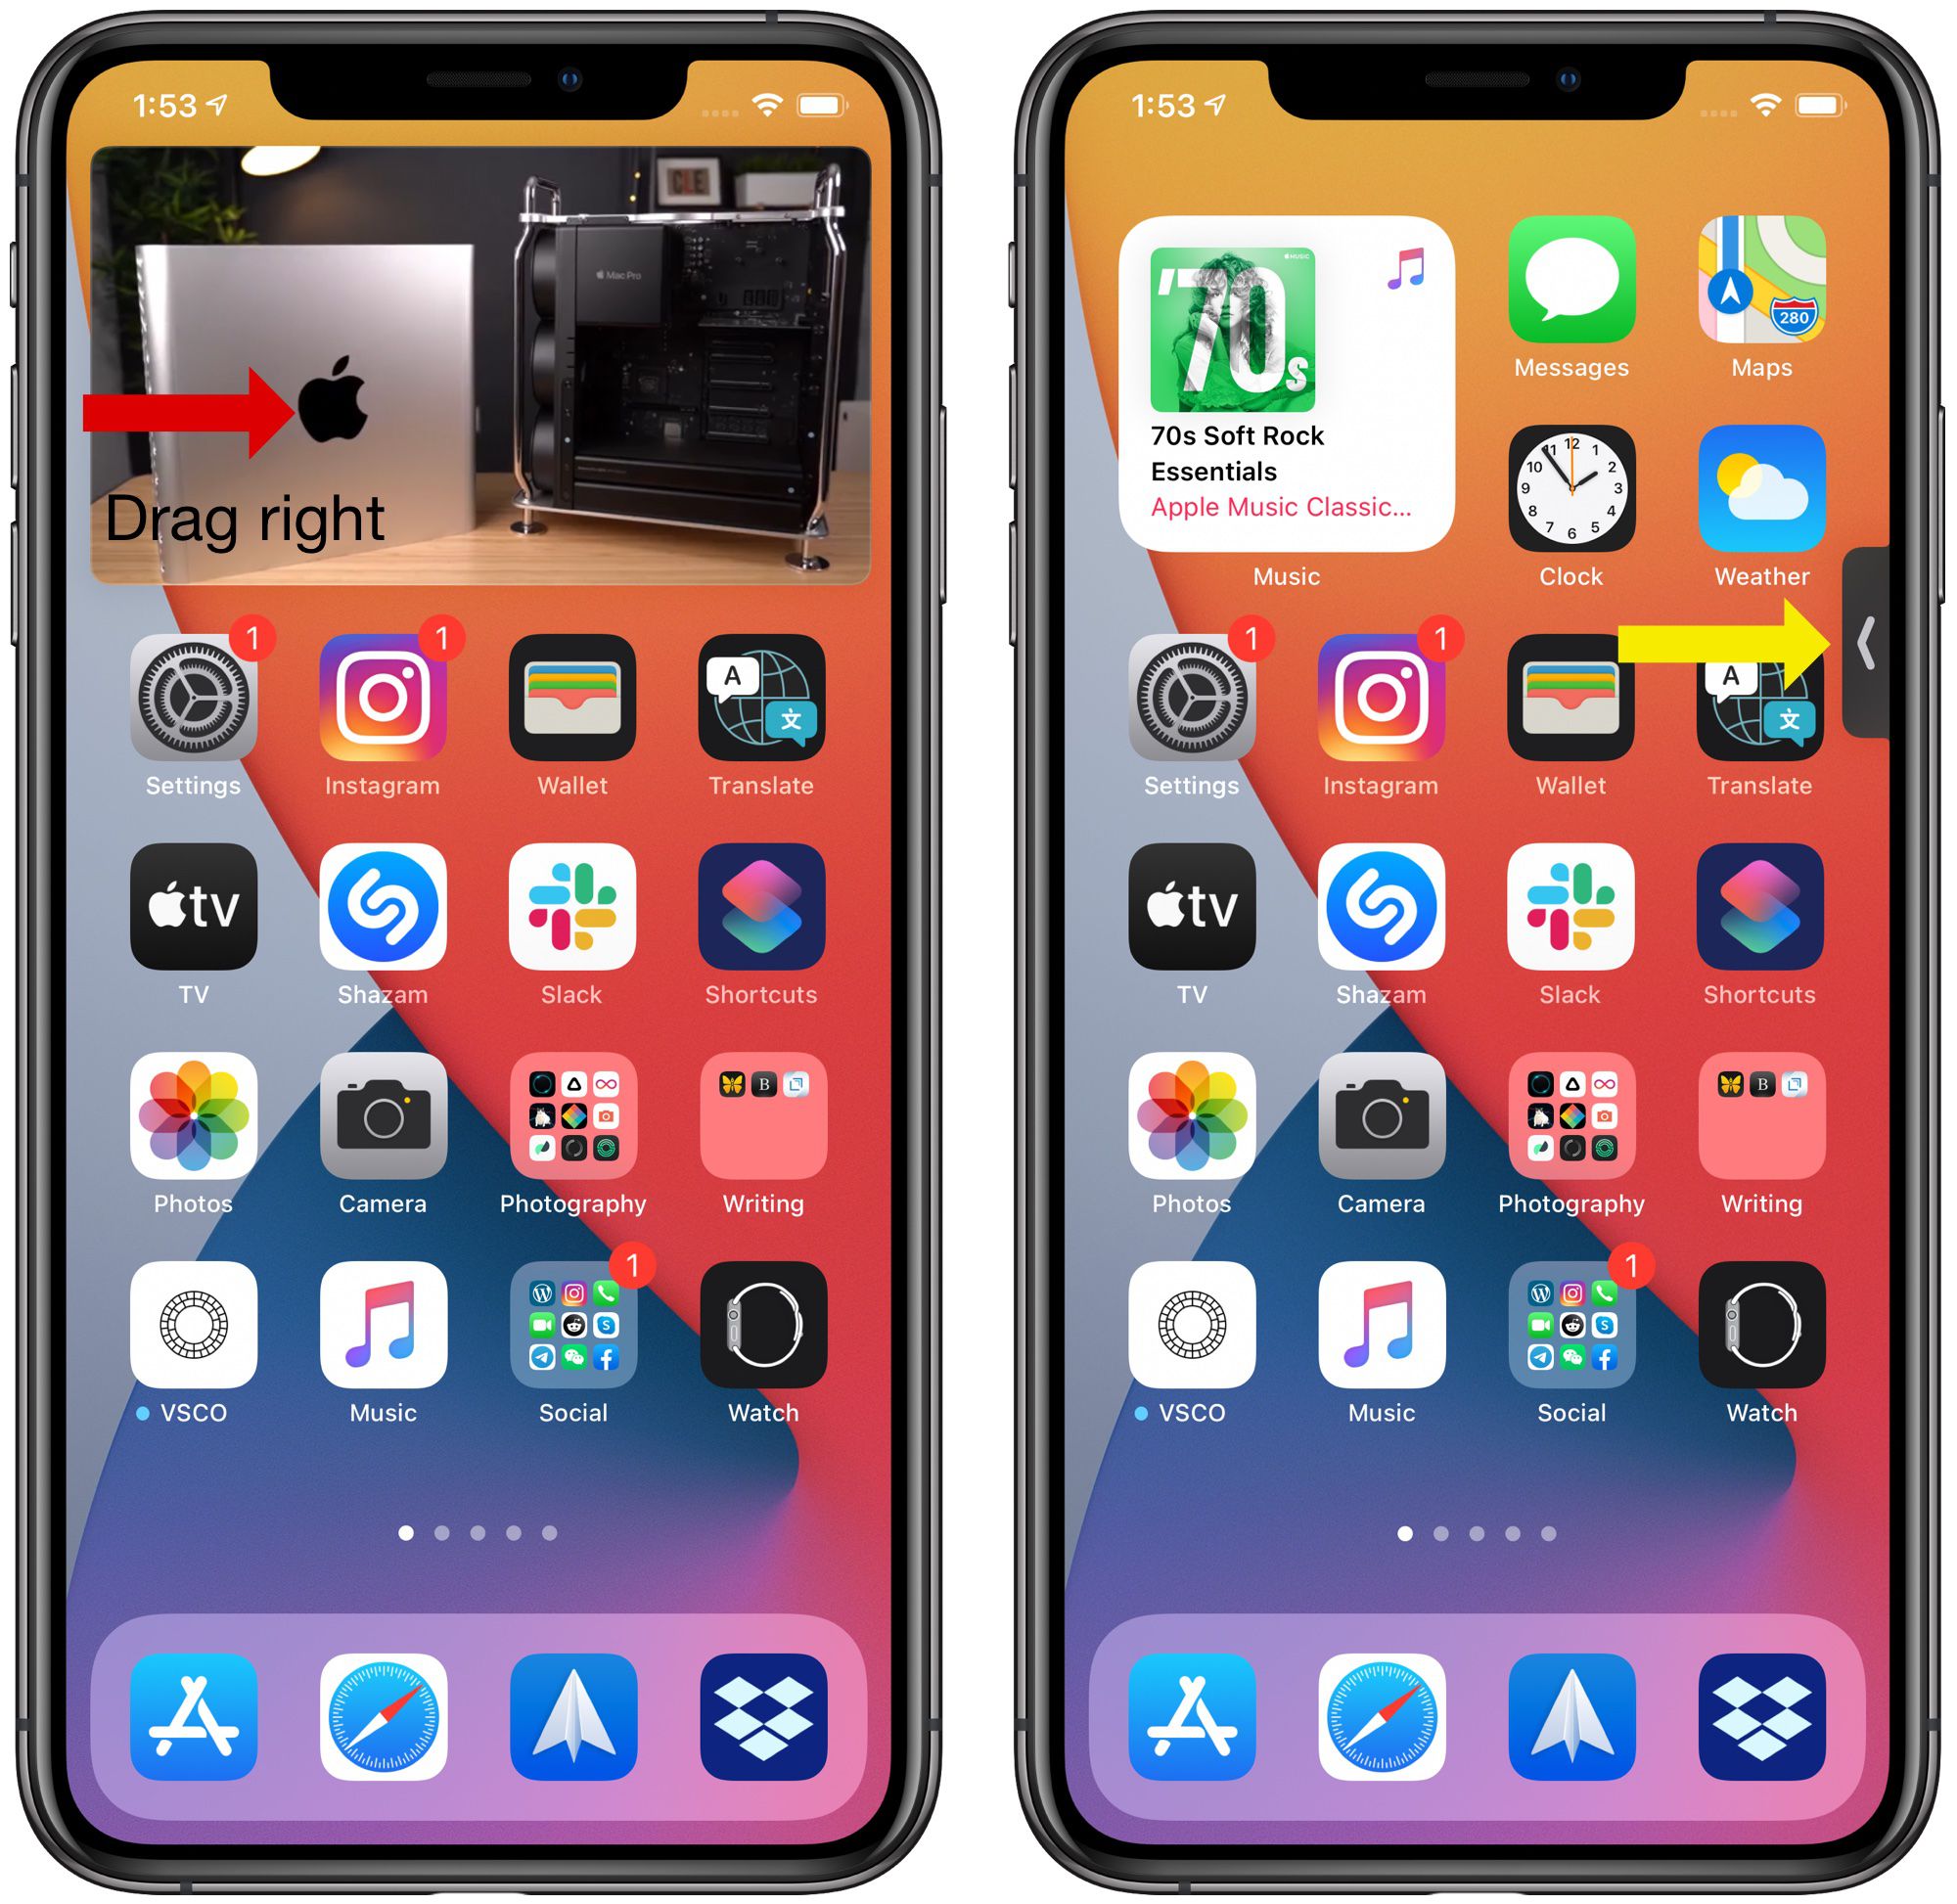 iOS 14: How to Use Picture in Picture Mode on iPhone - MacRumors